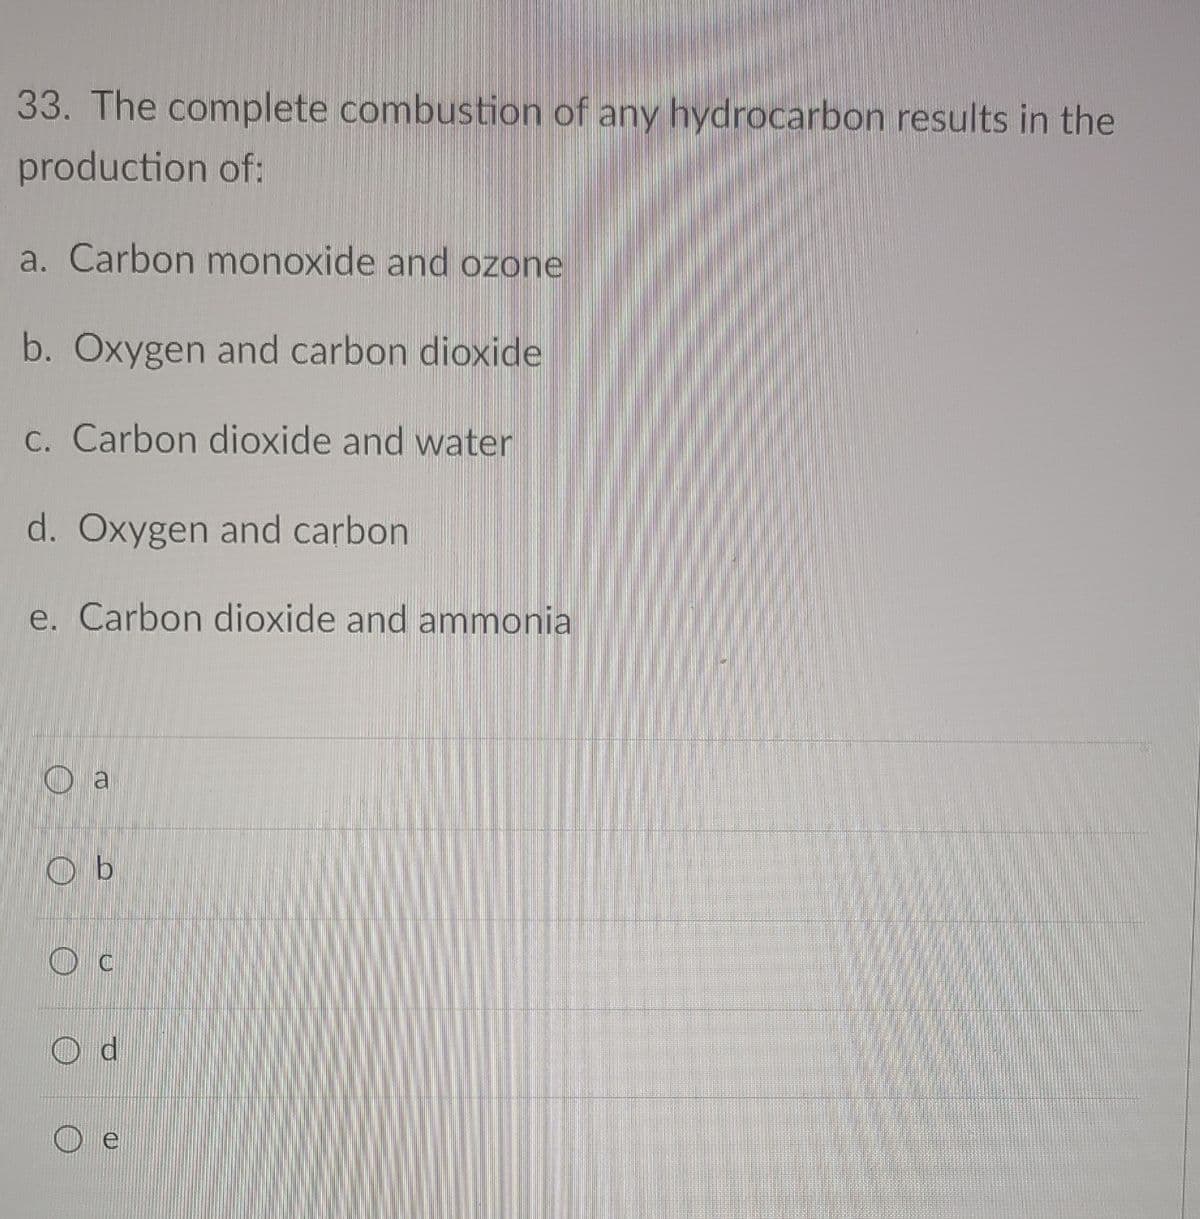 33. The complete combustion of any hydrocarbon results in the
production of:
a. Carbon monoxide and ozone
b. Oxygen and carbon dioxide
C. Carbon dioxide and water
d. Oxygen and carbon
e. Carbon dioxide and ammonia
O a
O b
